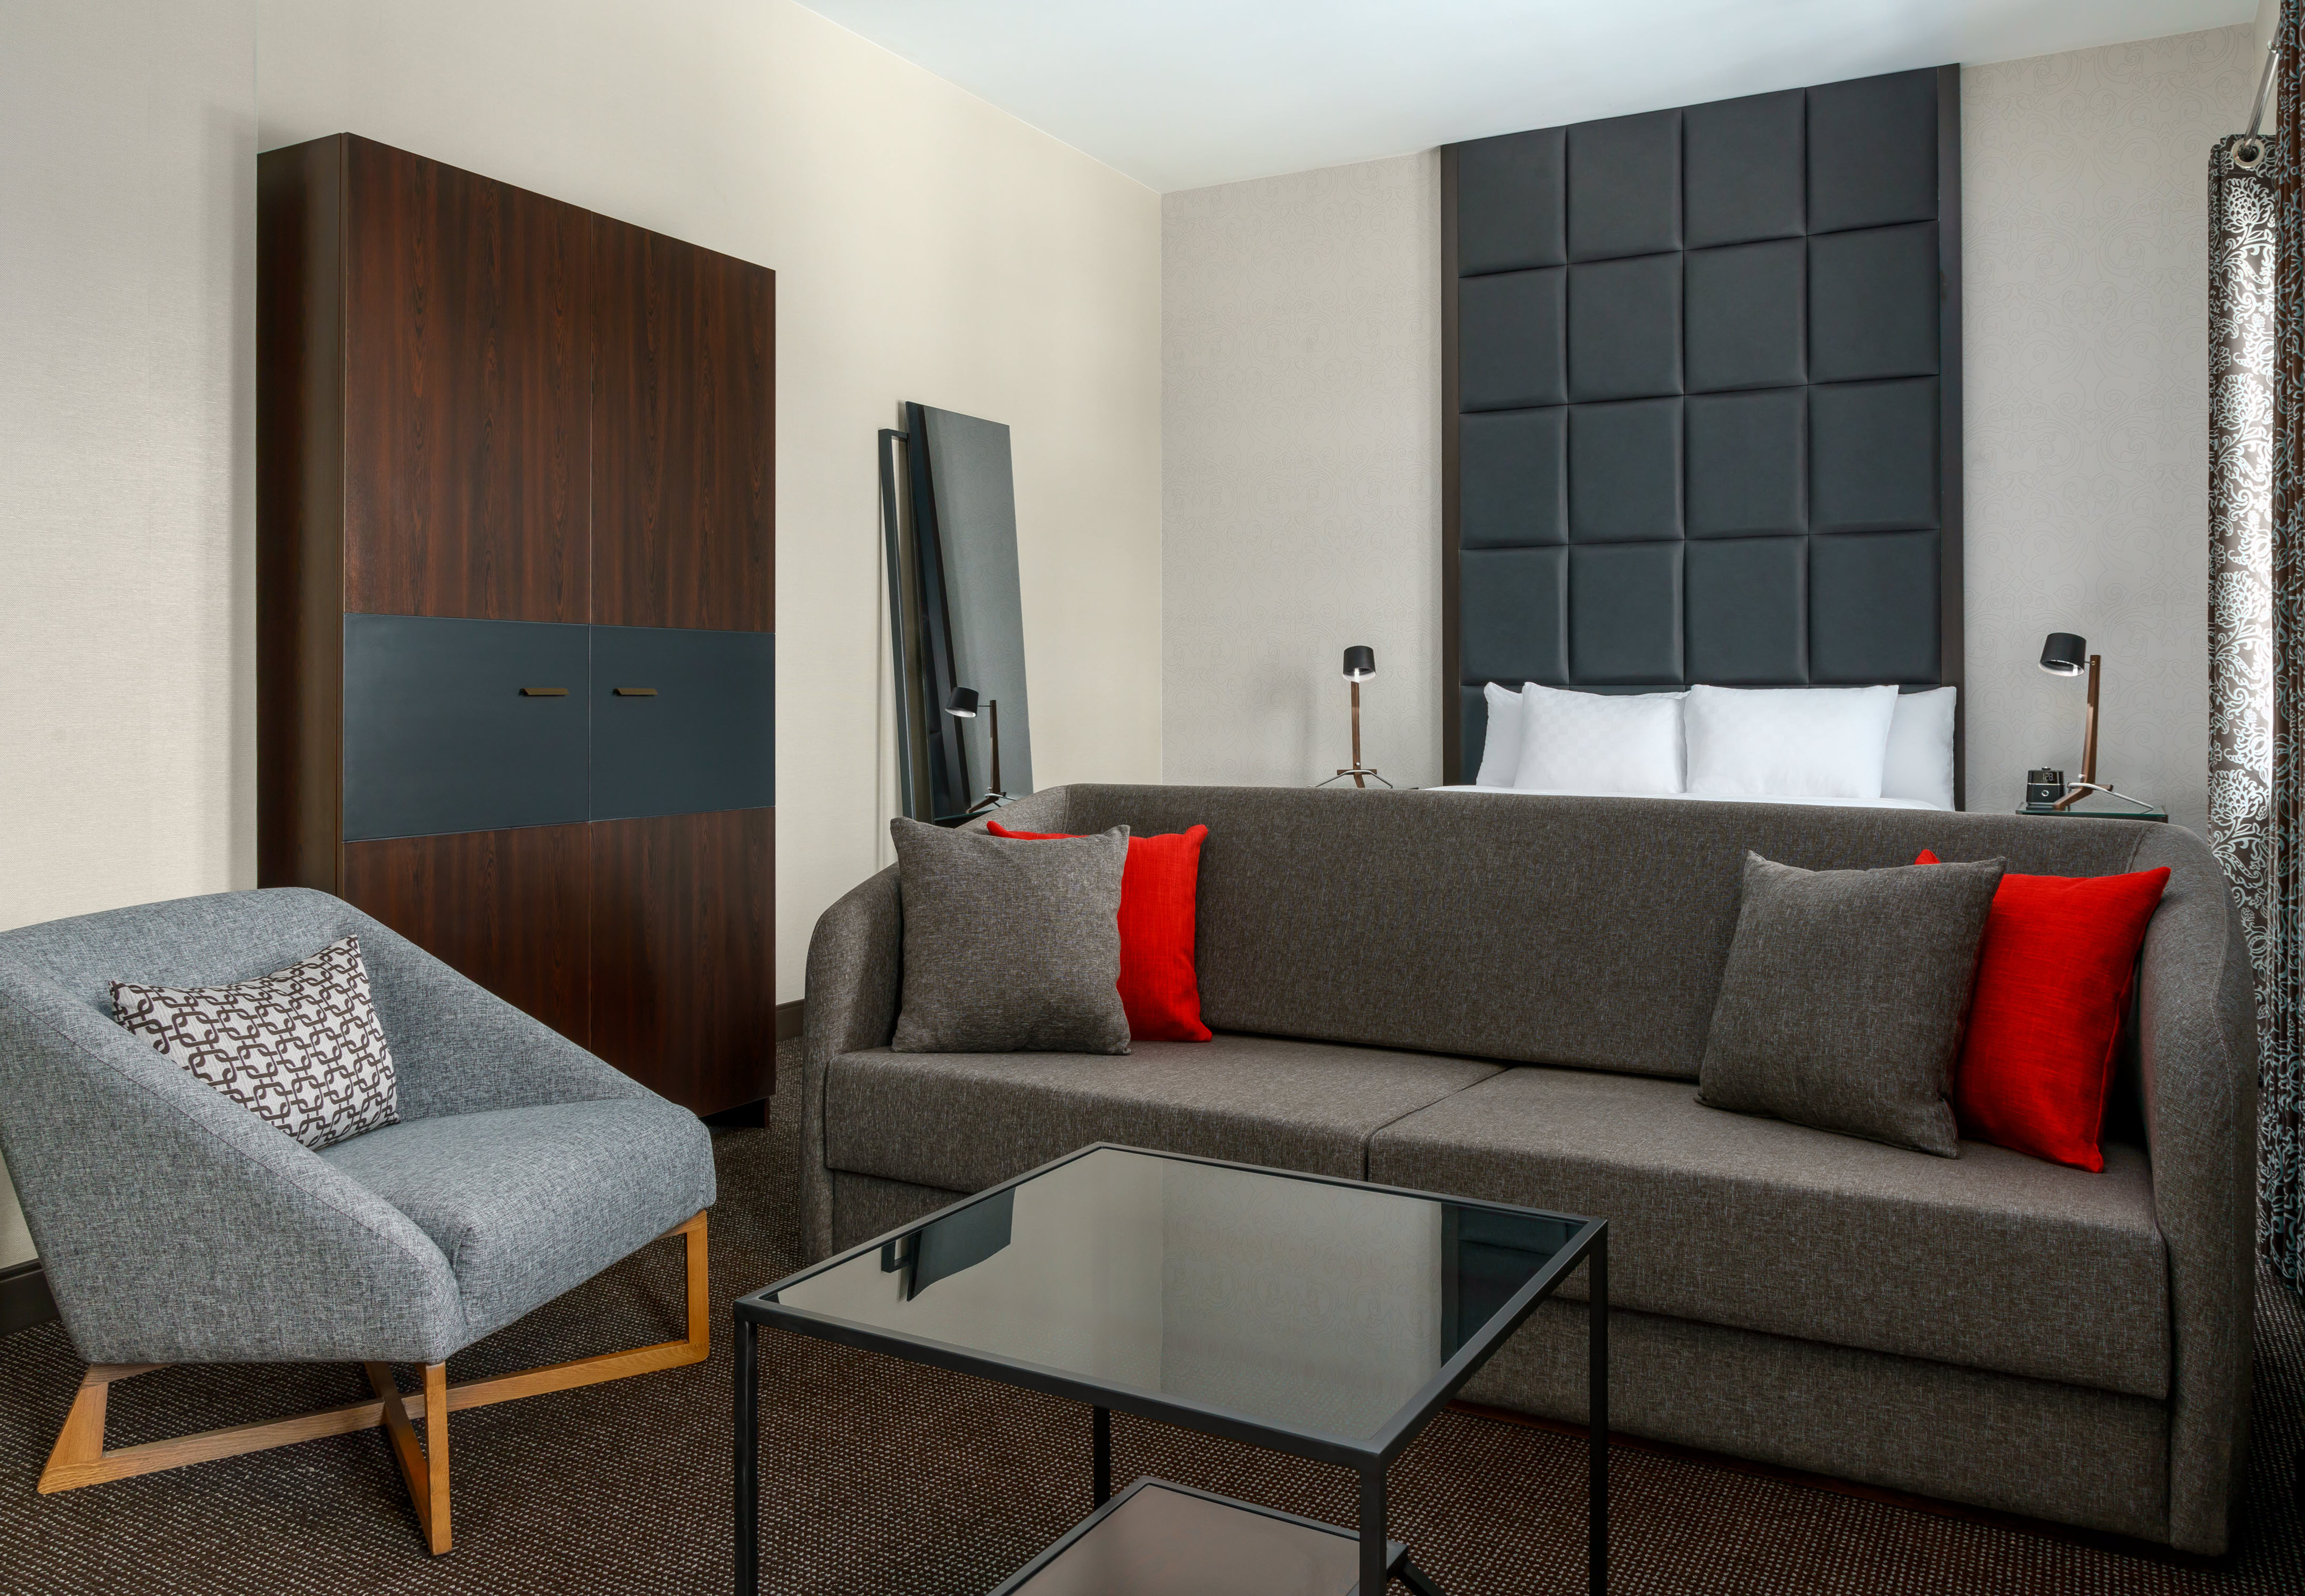 Guest Studio Suite with Sofa, Armchair and Glass Coffee Table